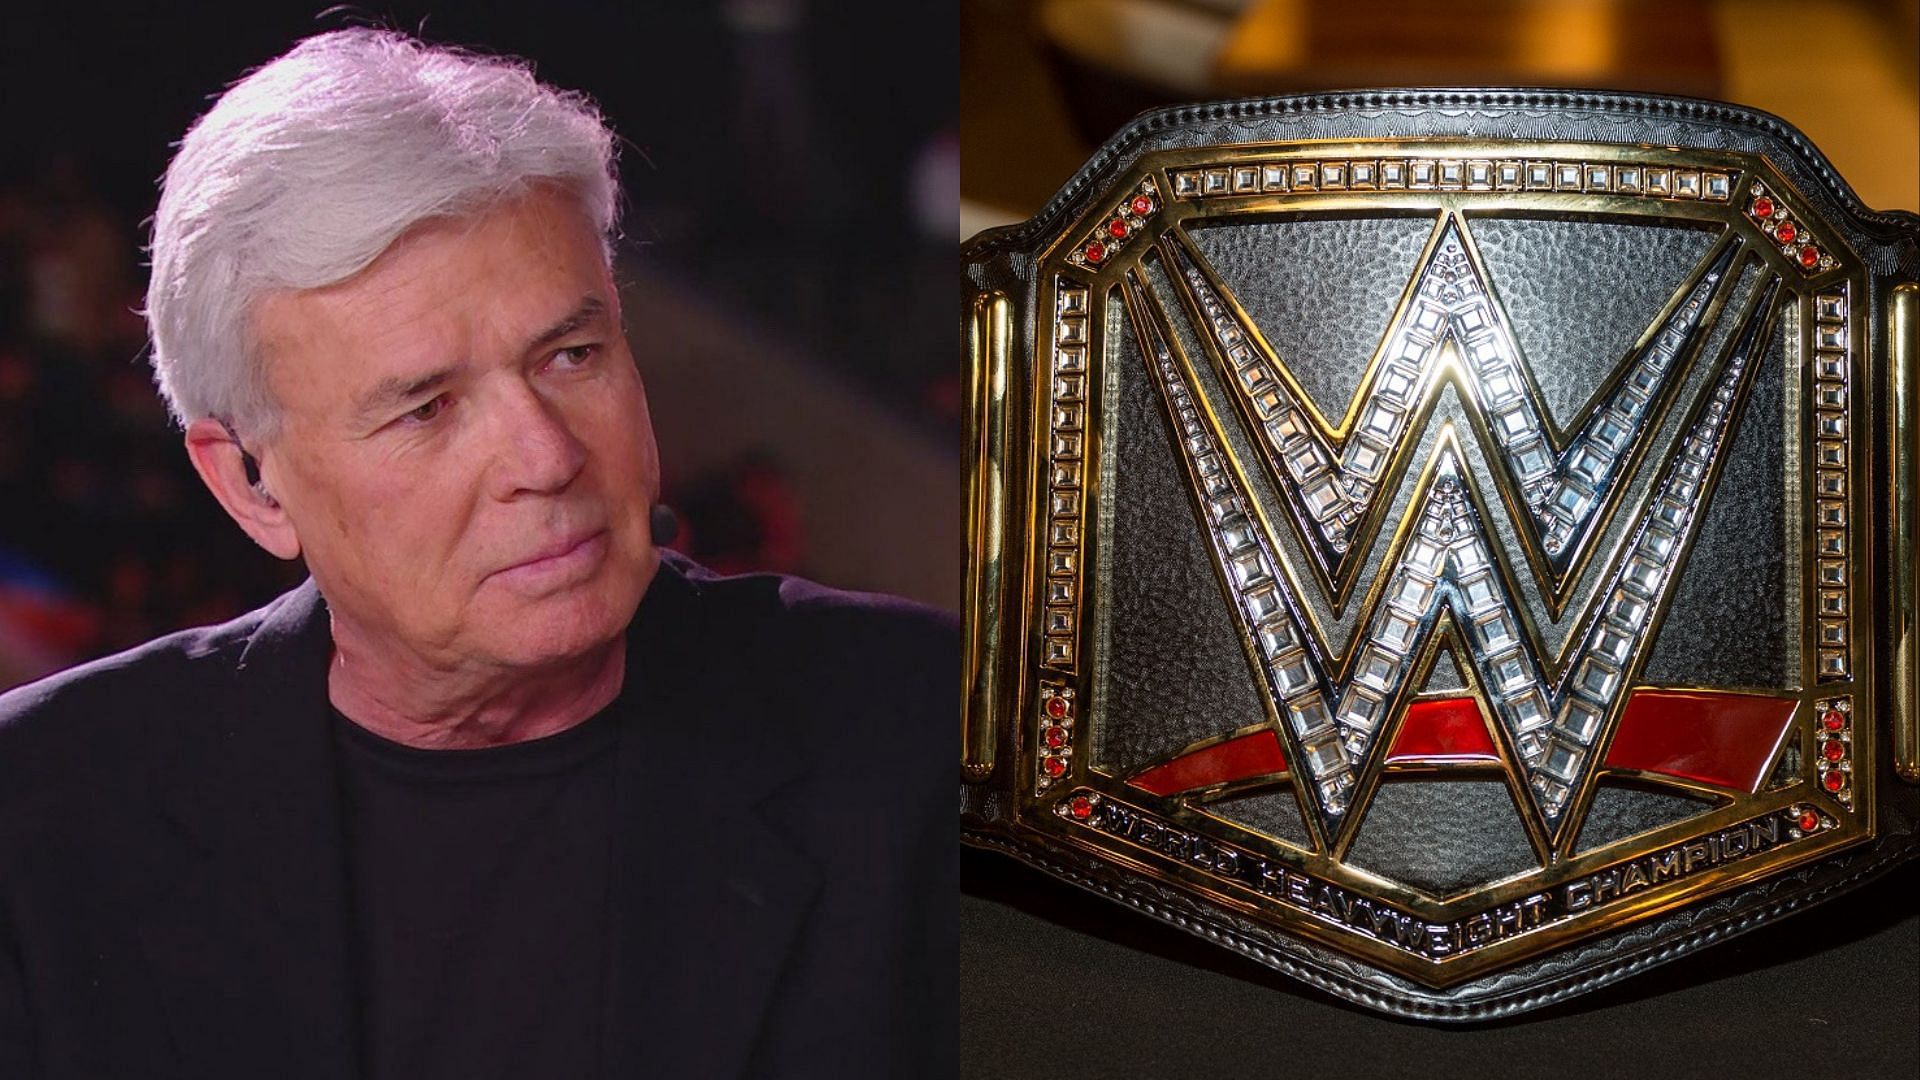 Eric Bischoff (left), WWE World Championship Title (right)